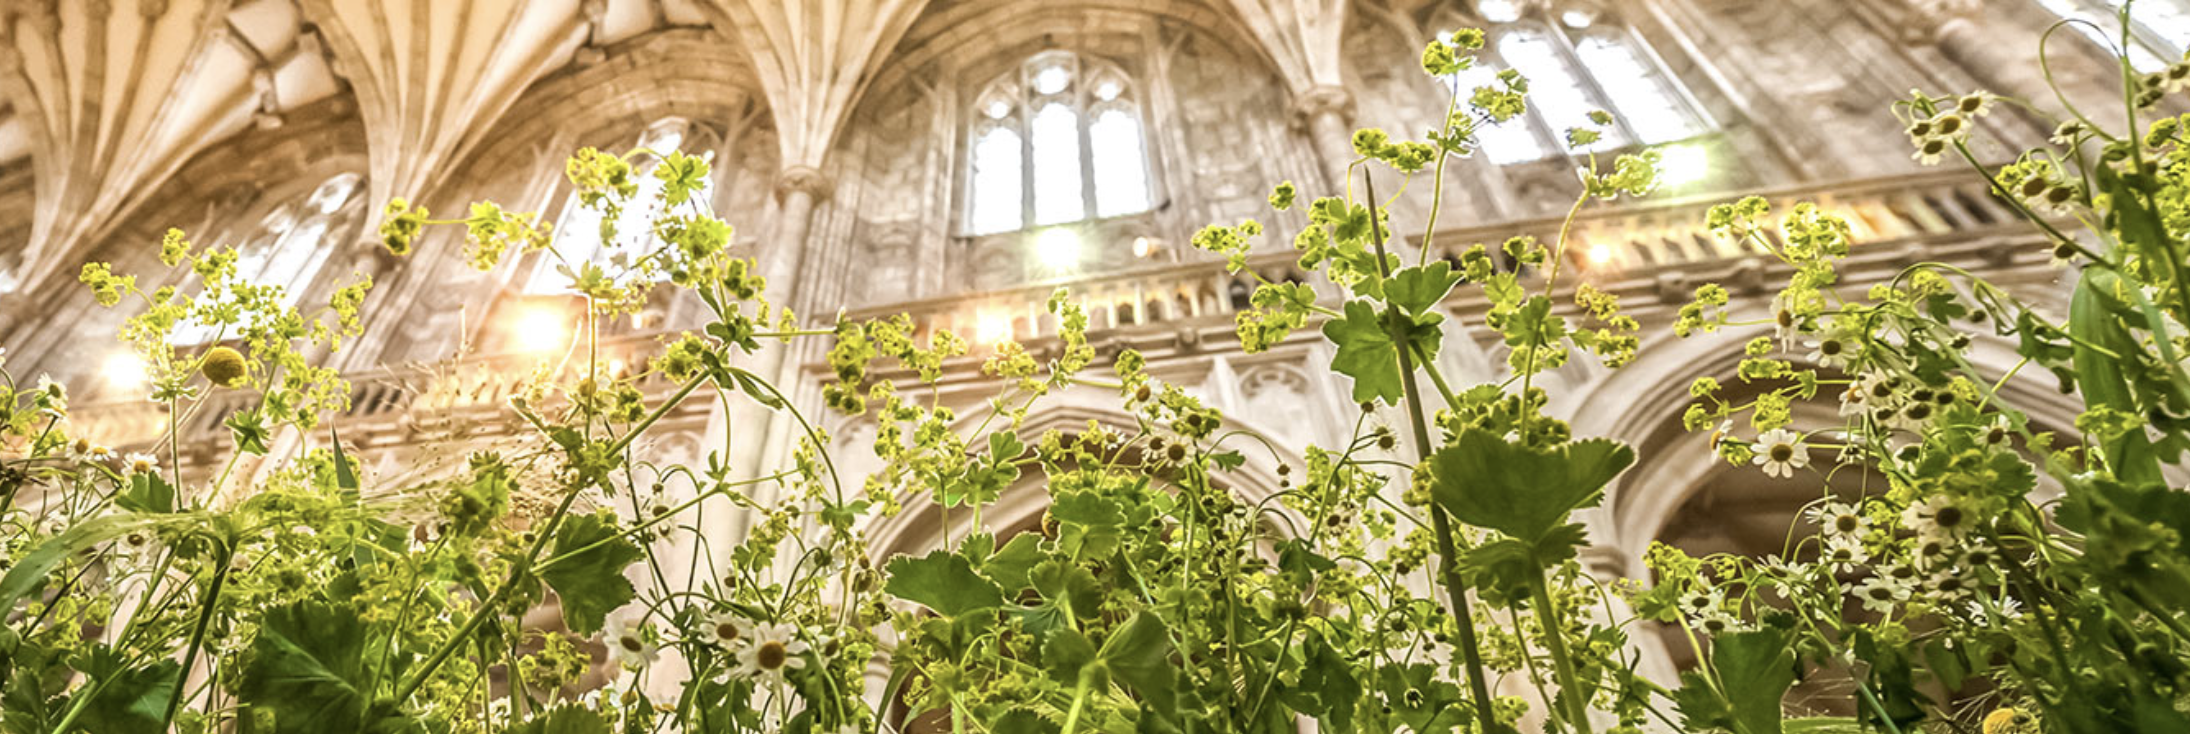 Greenery inside cathedral